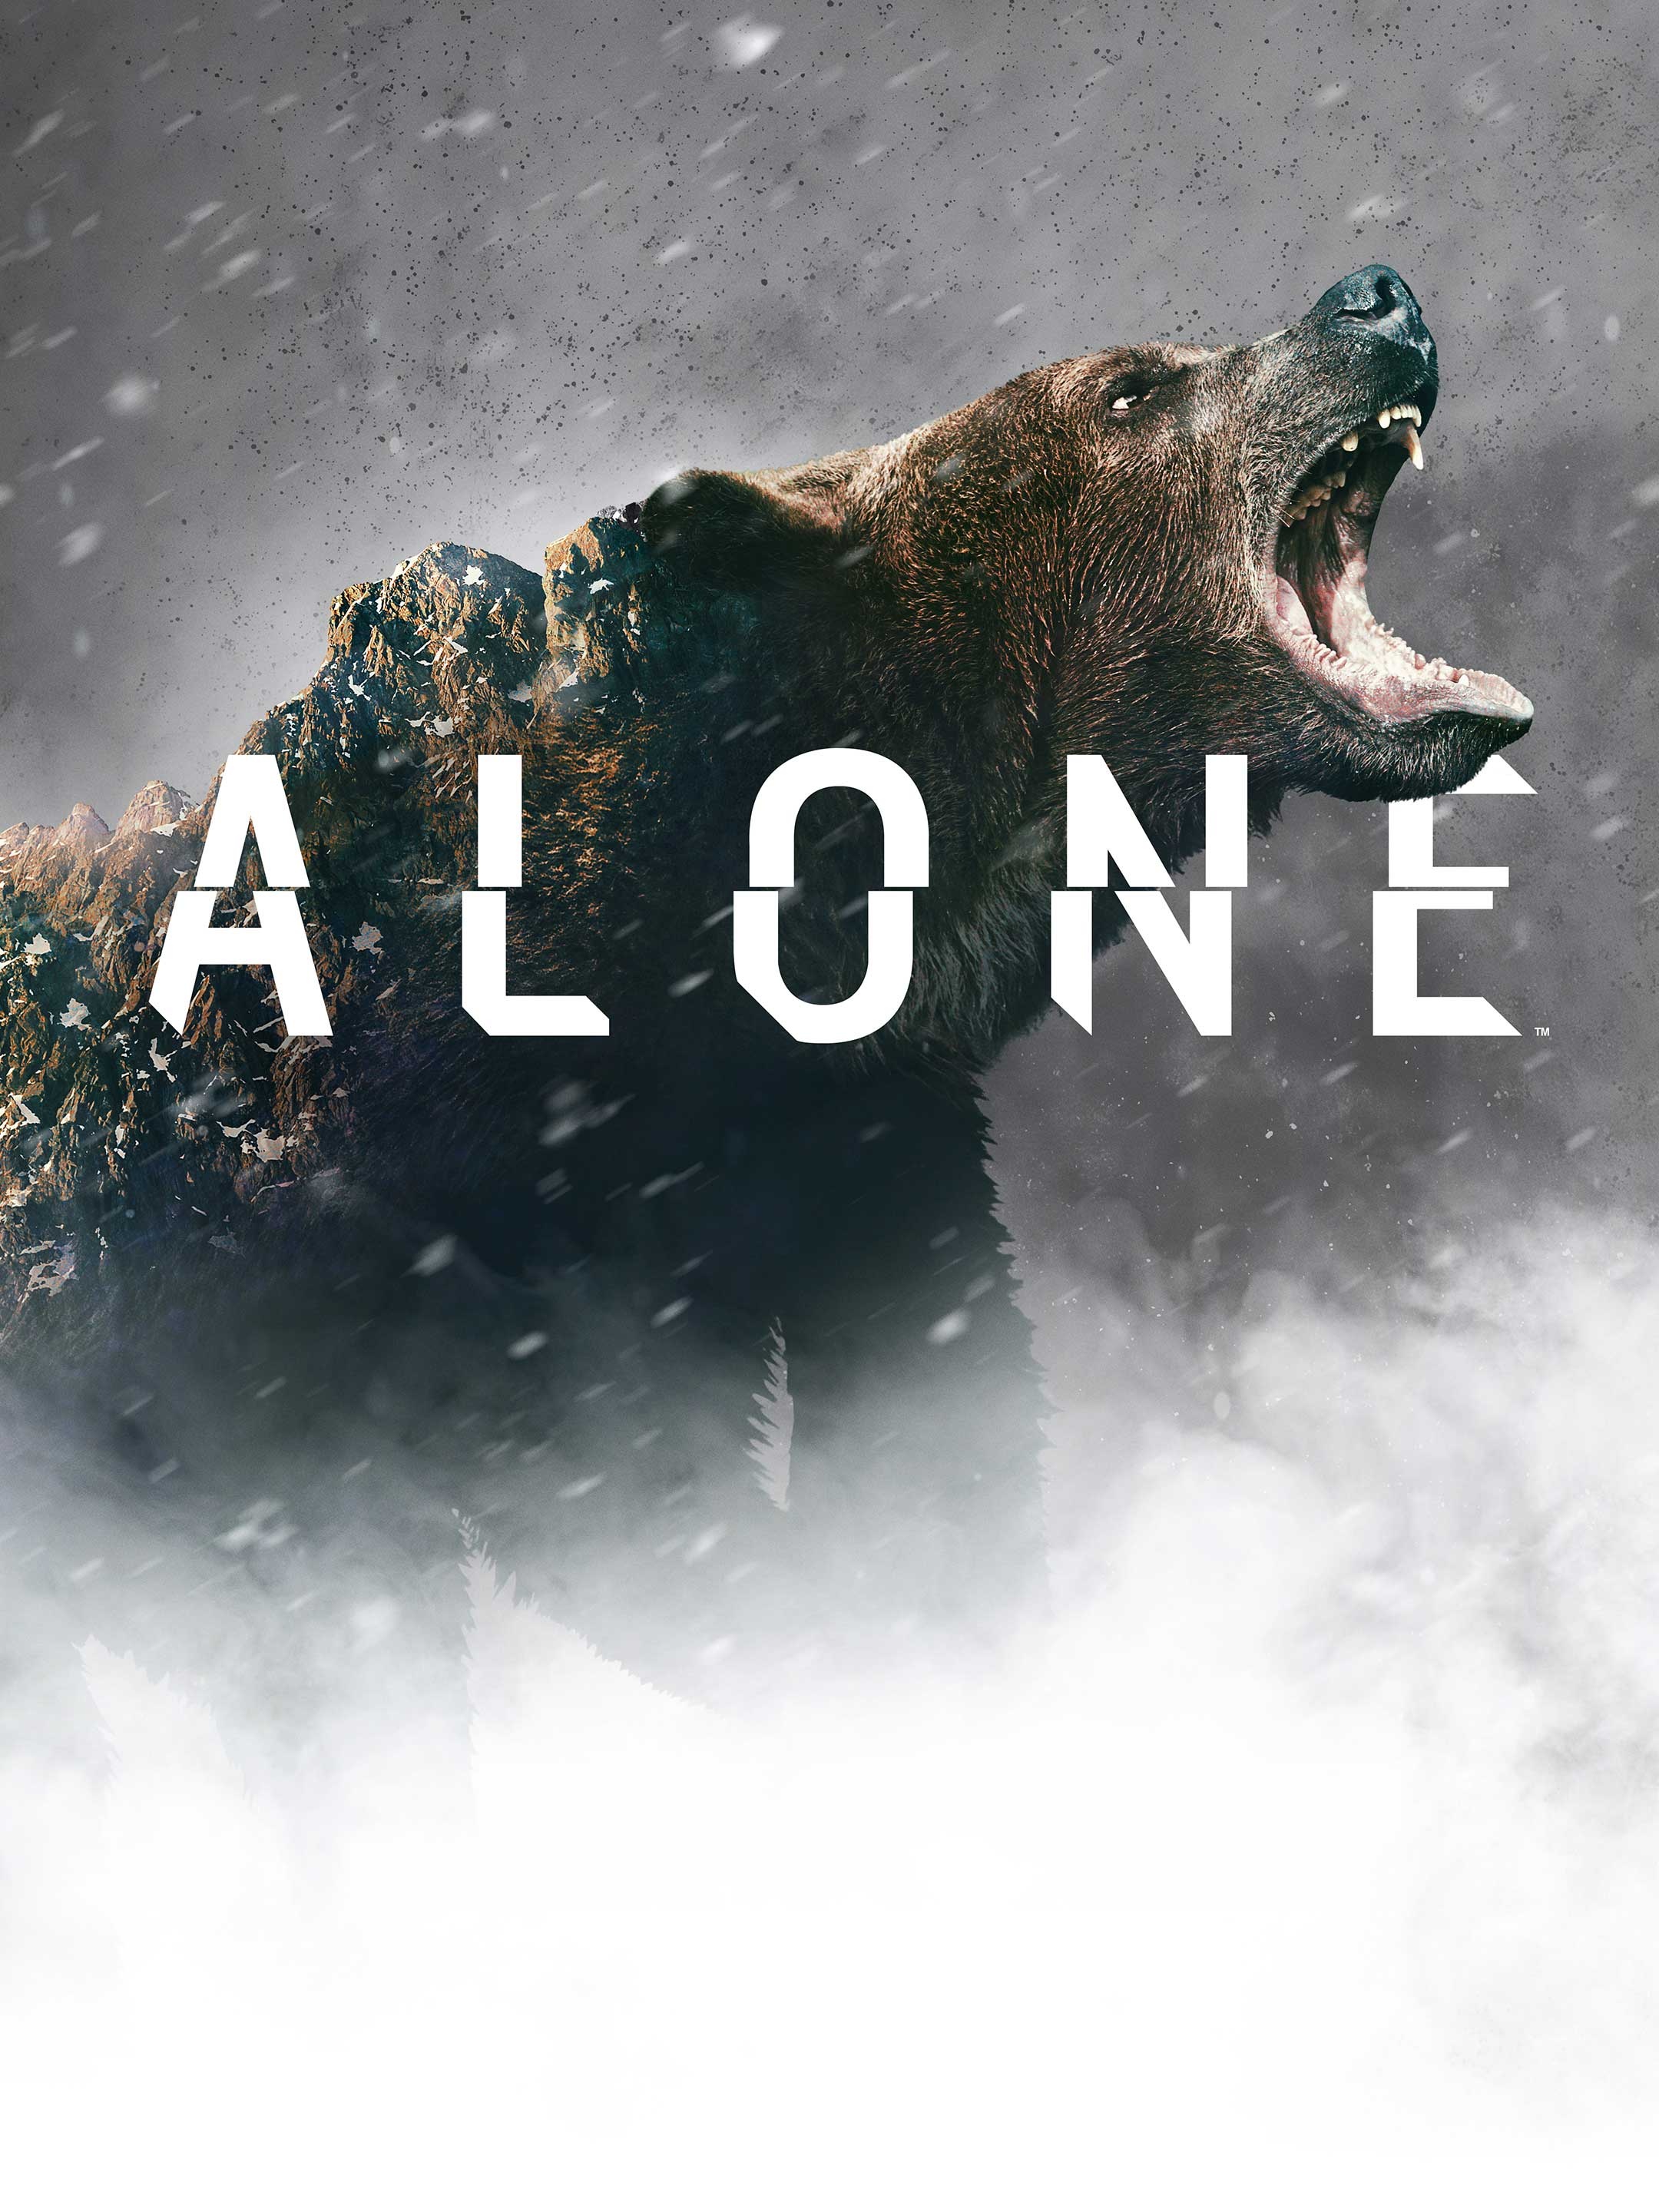 Where to watch Alone, TV guide, History channel, TV shows, 2160x2880 HD Handy